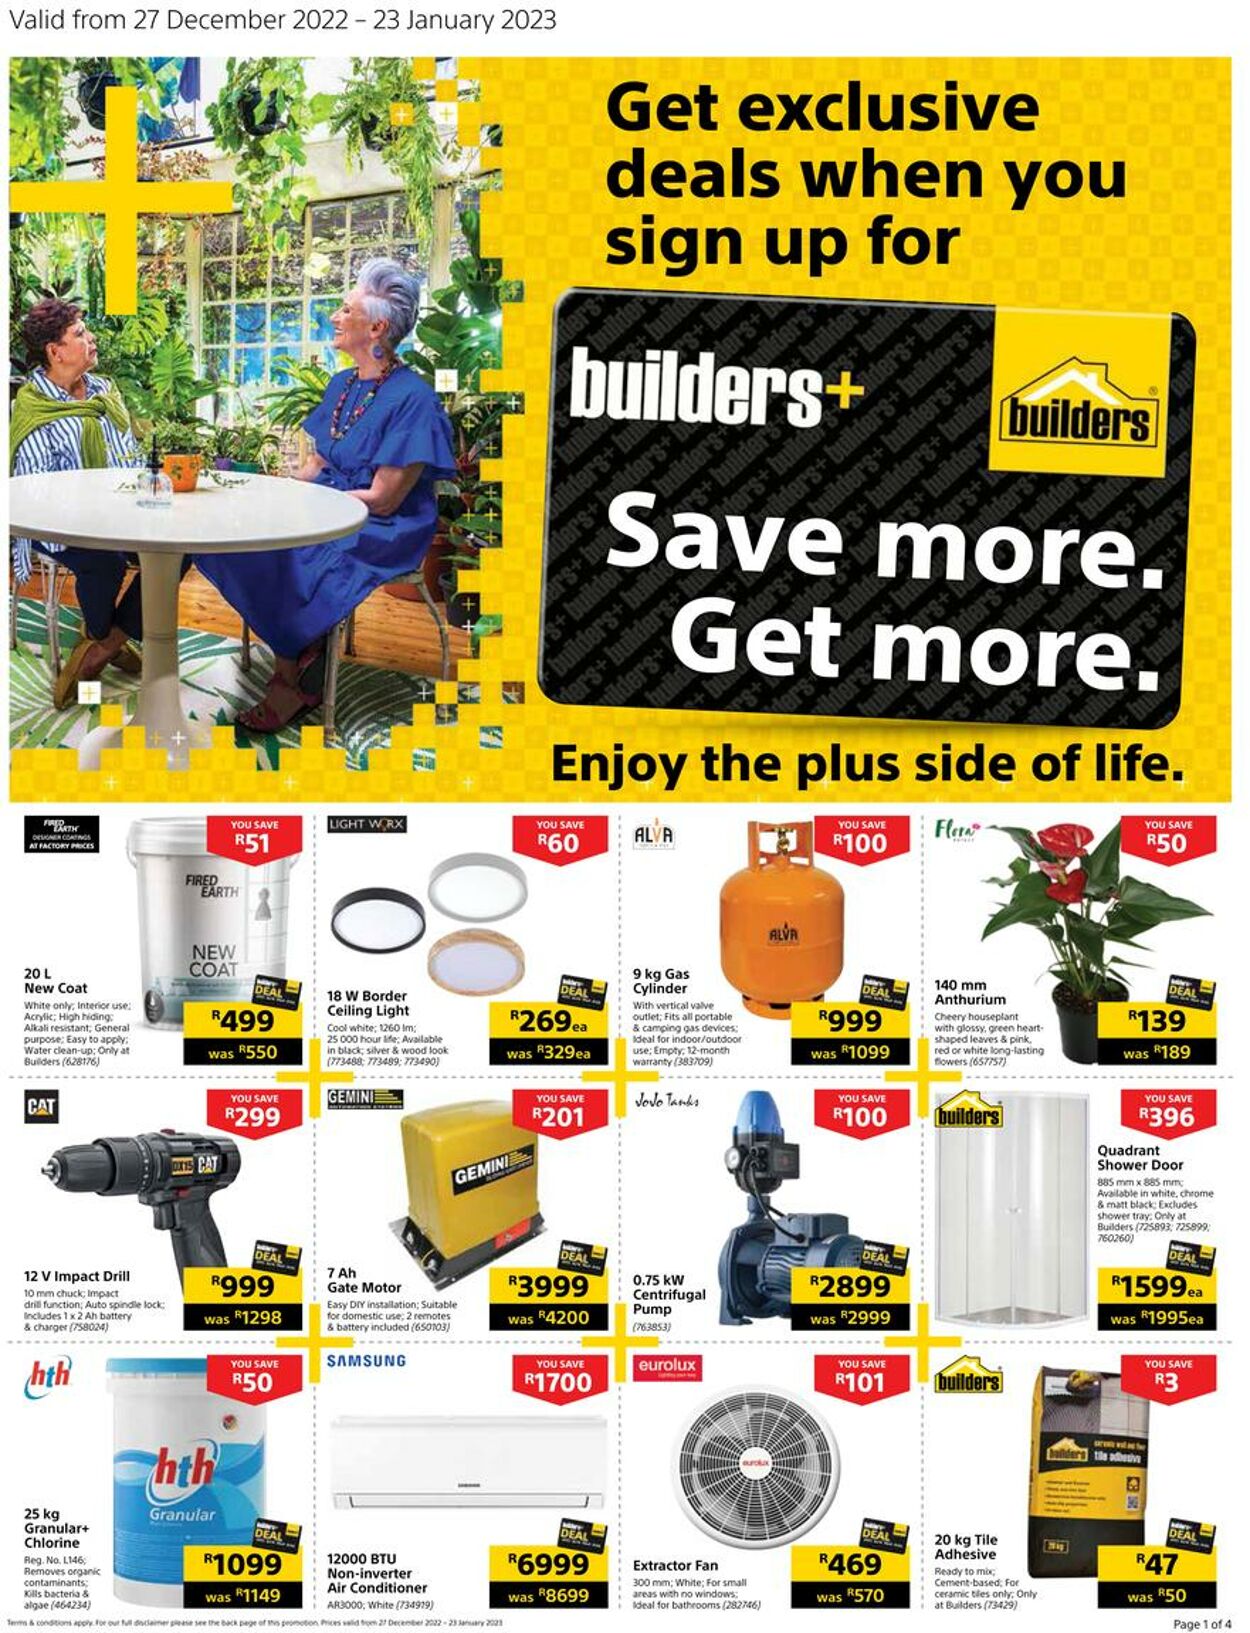 Special Builders Warehouse 27.12.2022-23.01.2023